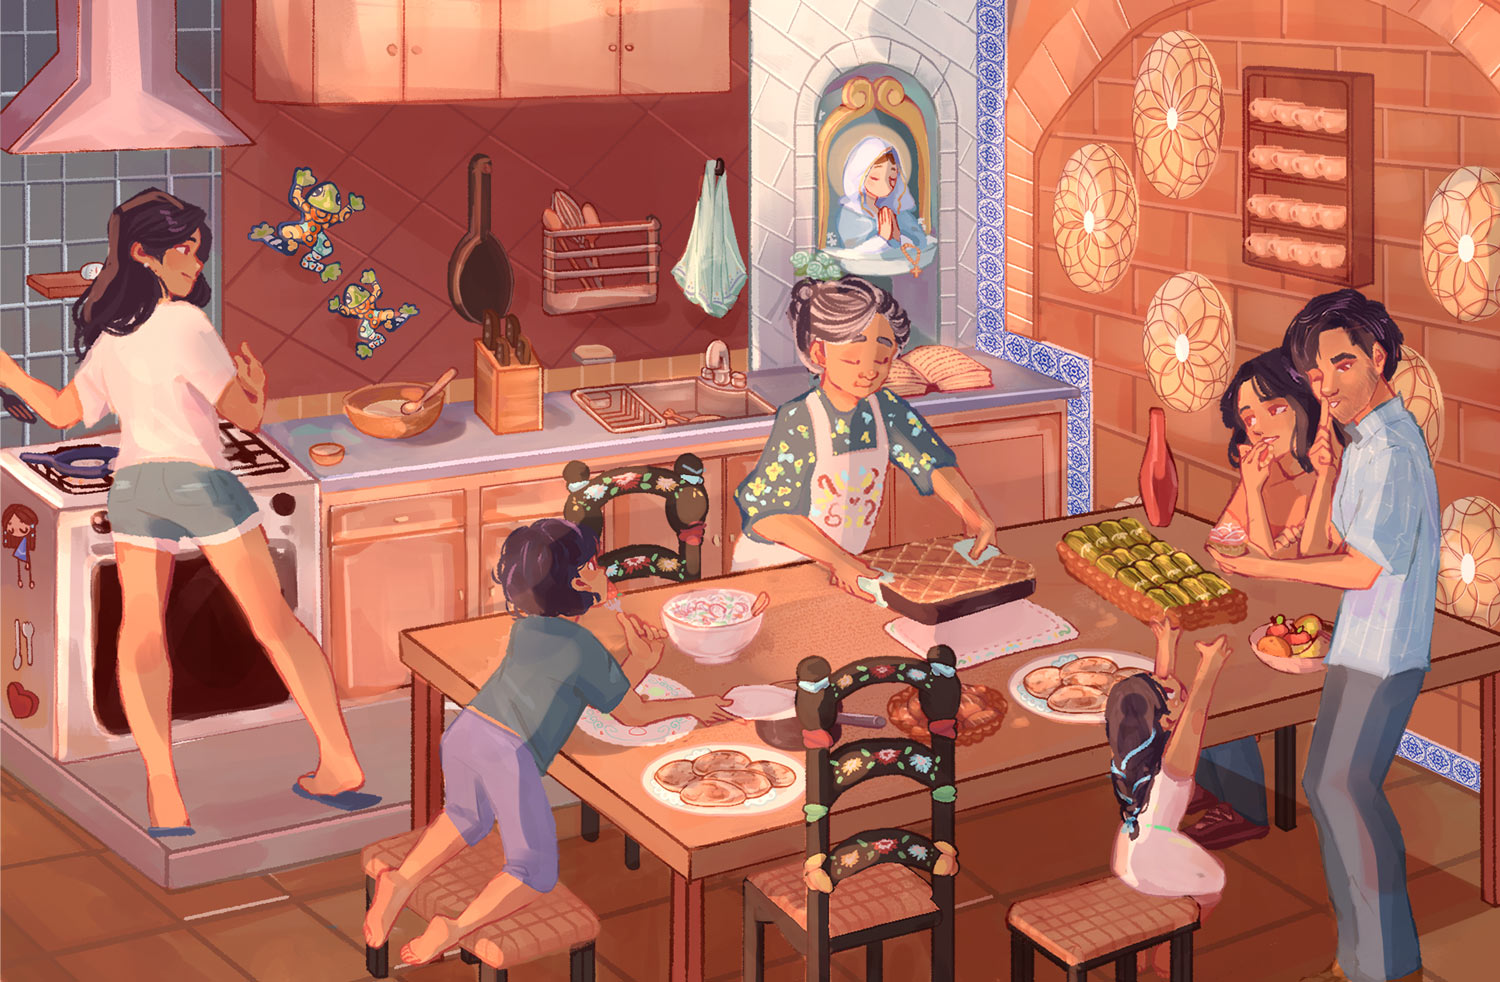 Illustrated scene of a family in the kitchen, by Alexandra Hidalgo